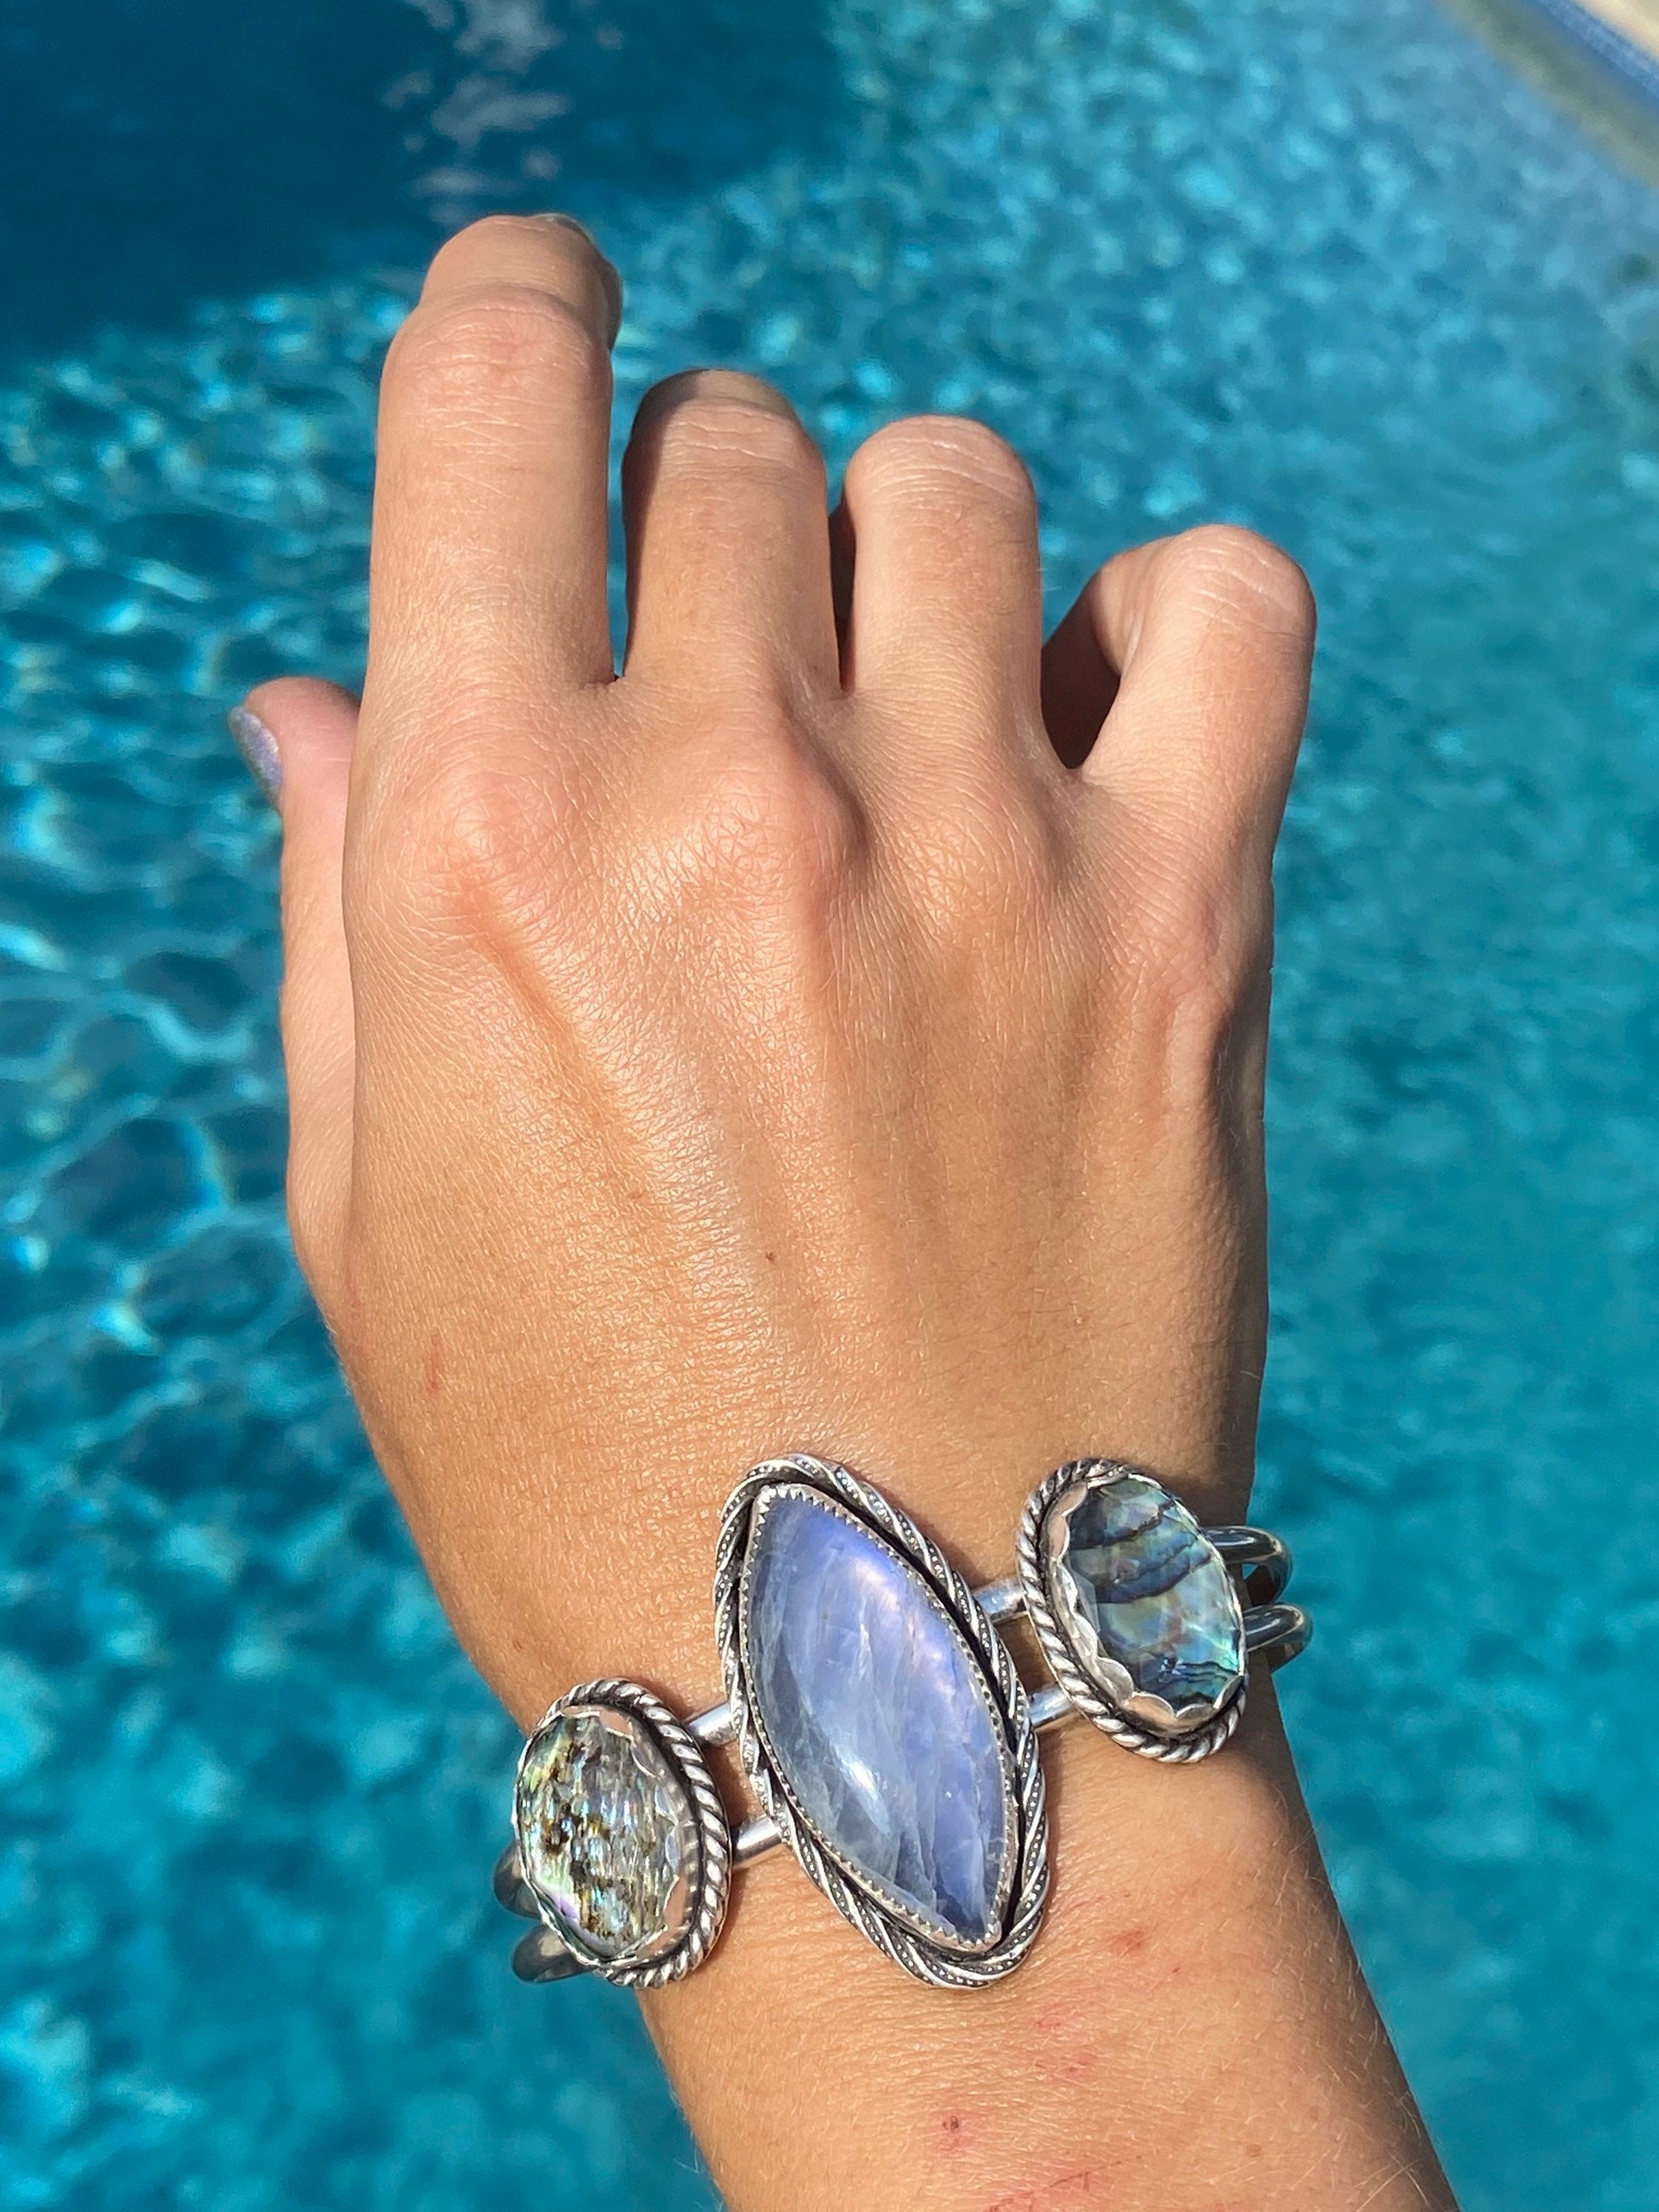 Moonstone and Abalone/Quartz Doublet Cuff //Once Upon Collecti a Dream thebohemianfairie –